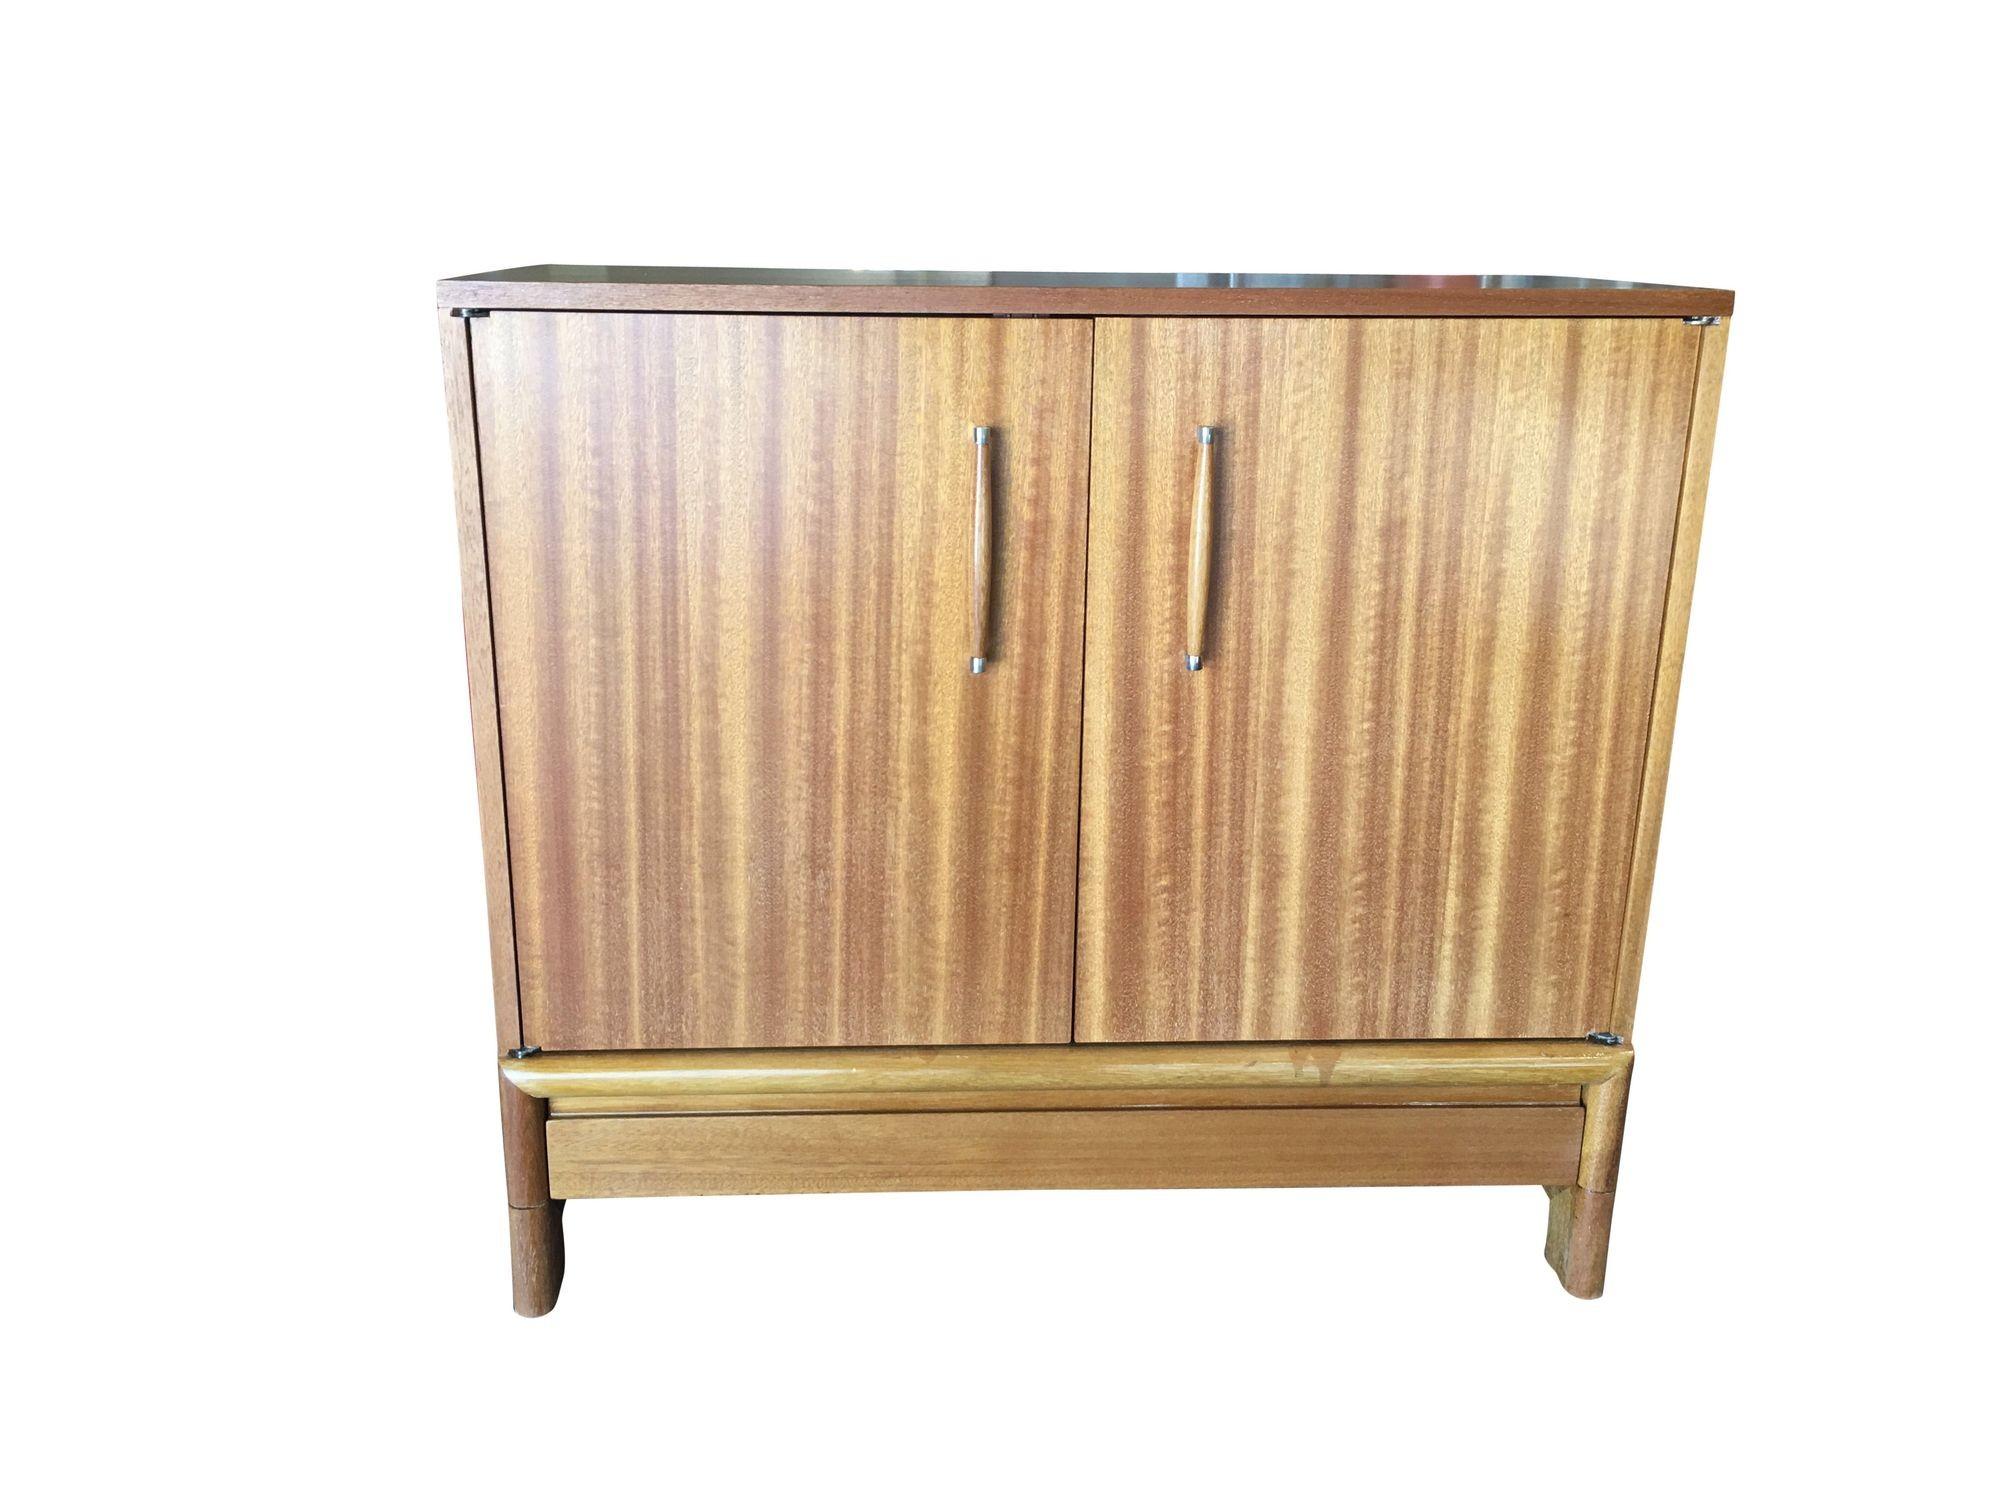 Embracing the essence of mid-century Danish modern design, this oak sideboard cabinet epitomizes sleek simplicity. Clean lines, organic materials, and a warm oak finish define its timeless allure, offering functional elegance for any space seeking a